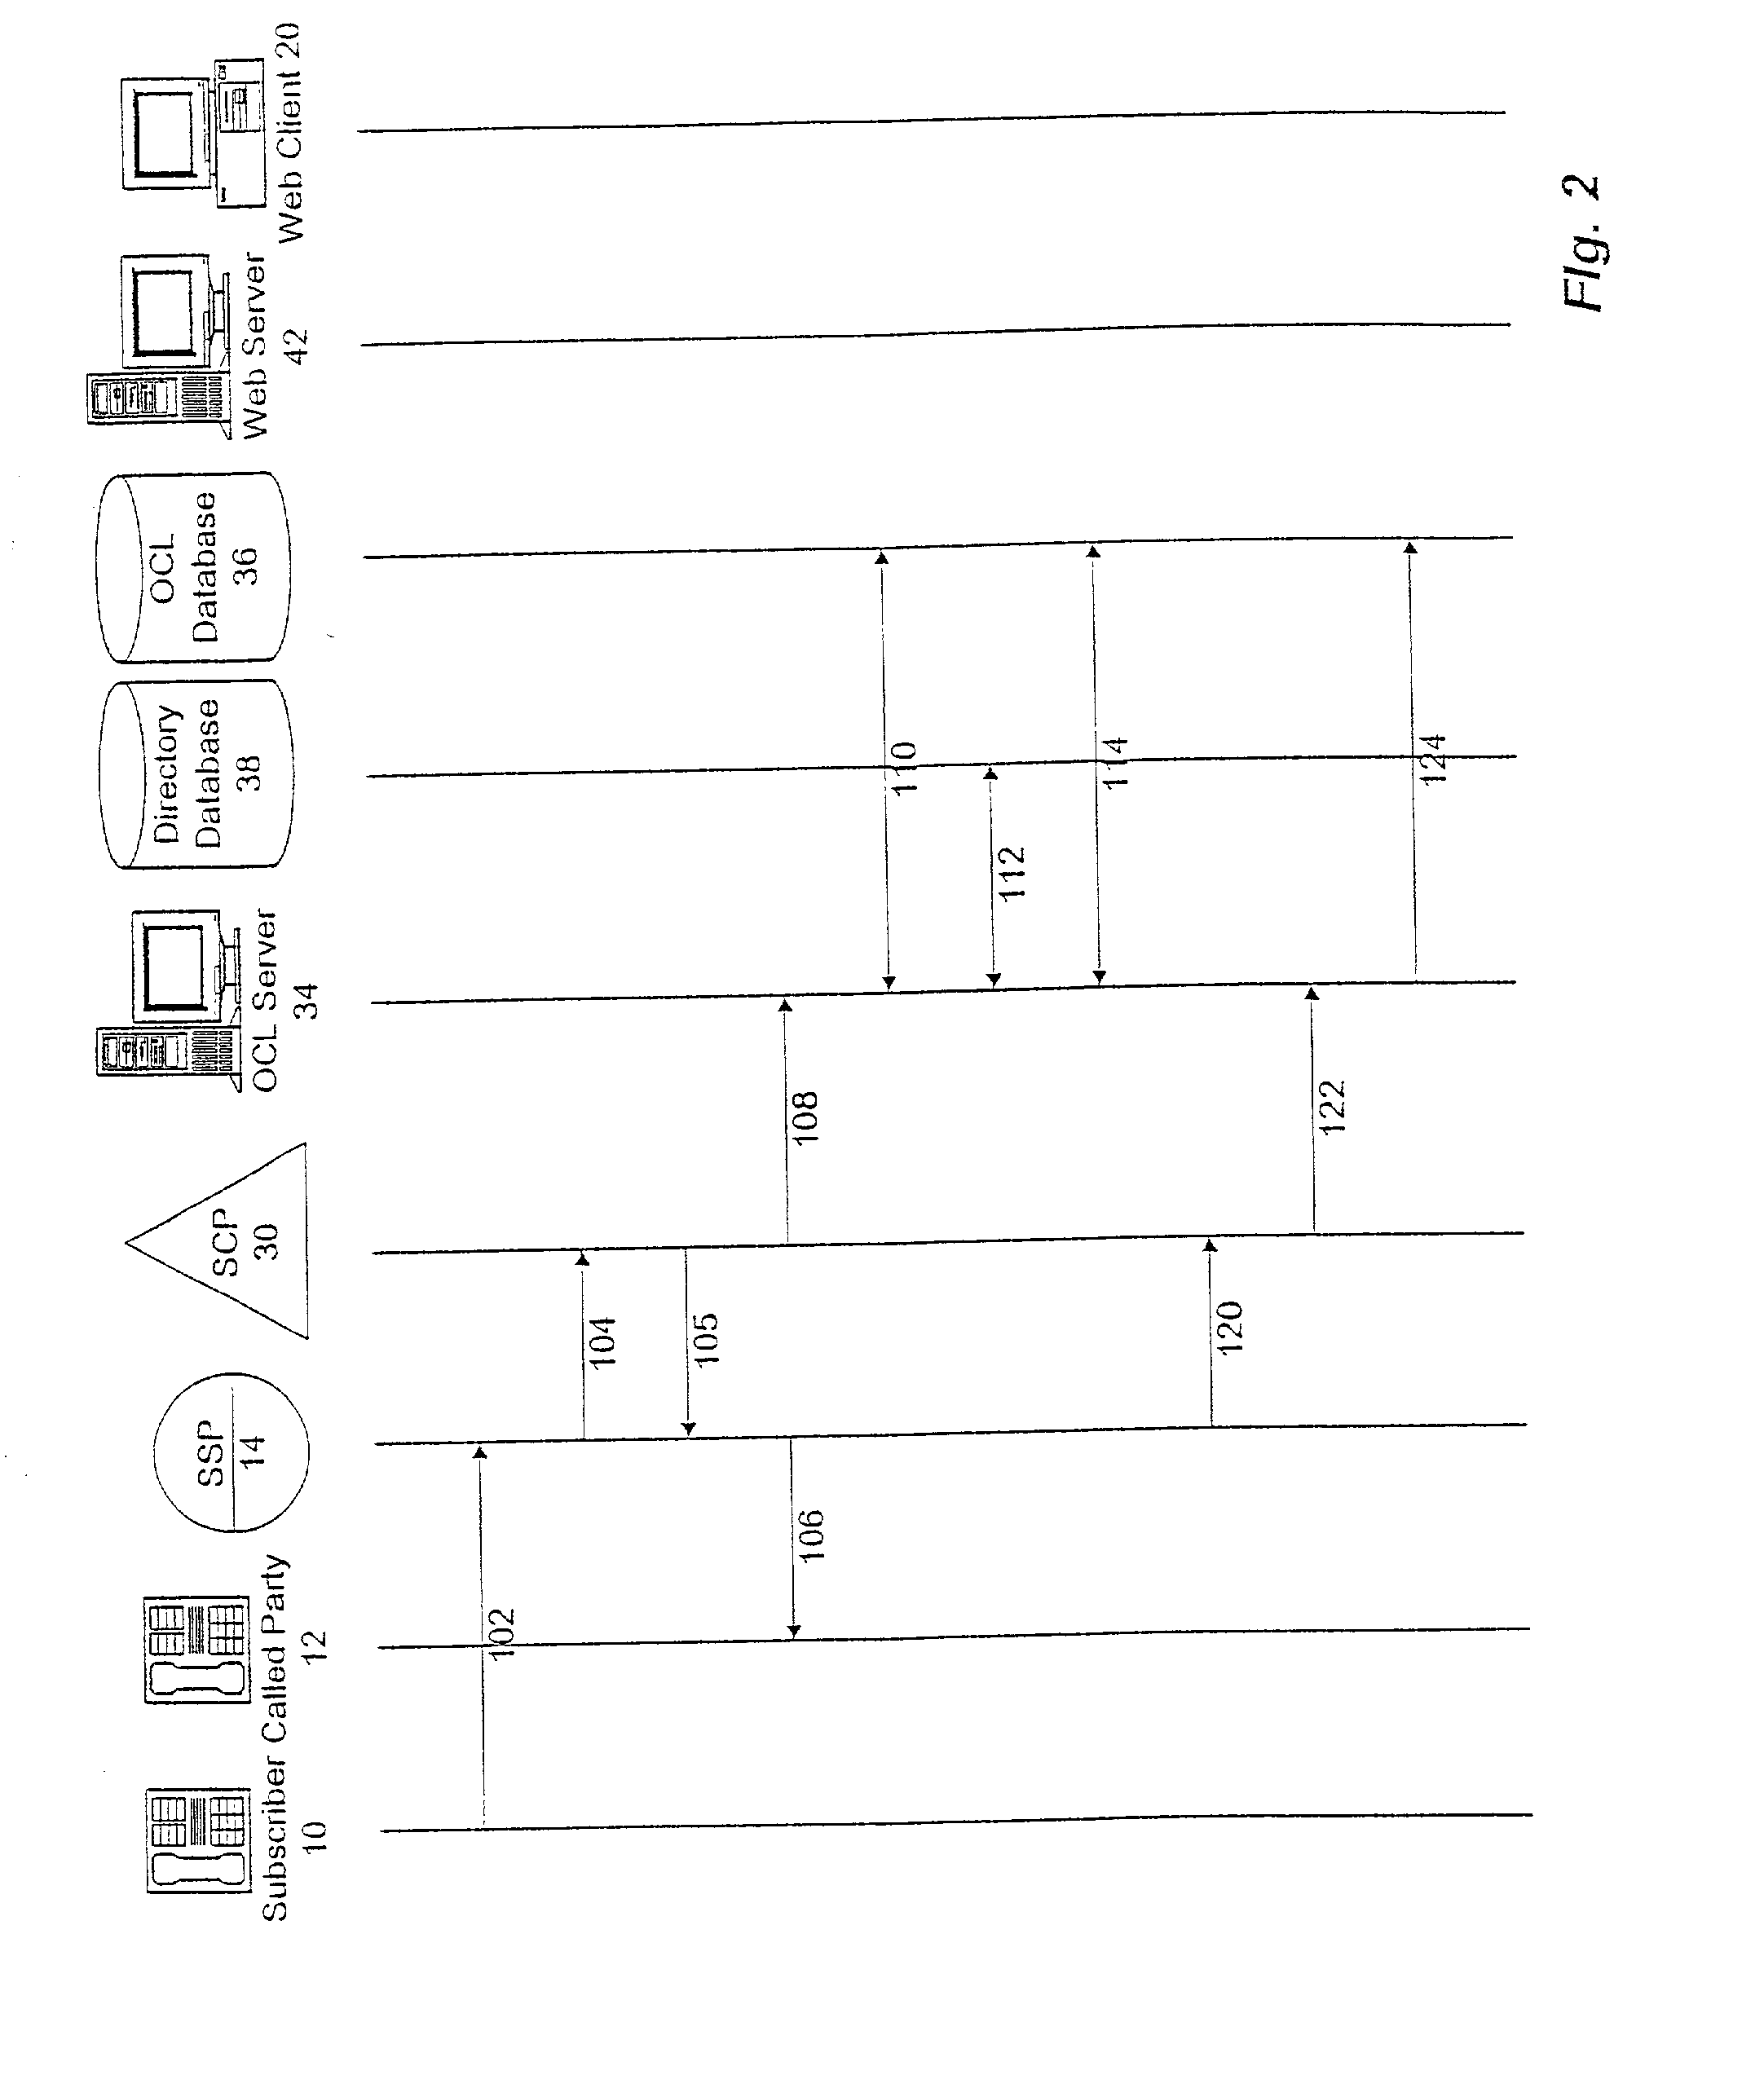 System and method for creating and accessing outgoing telephone call log